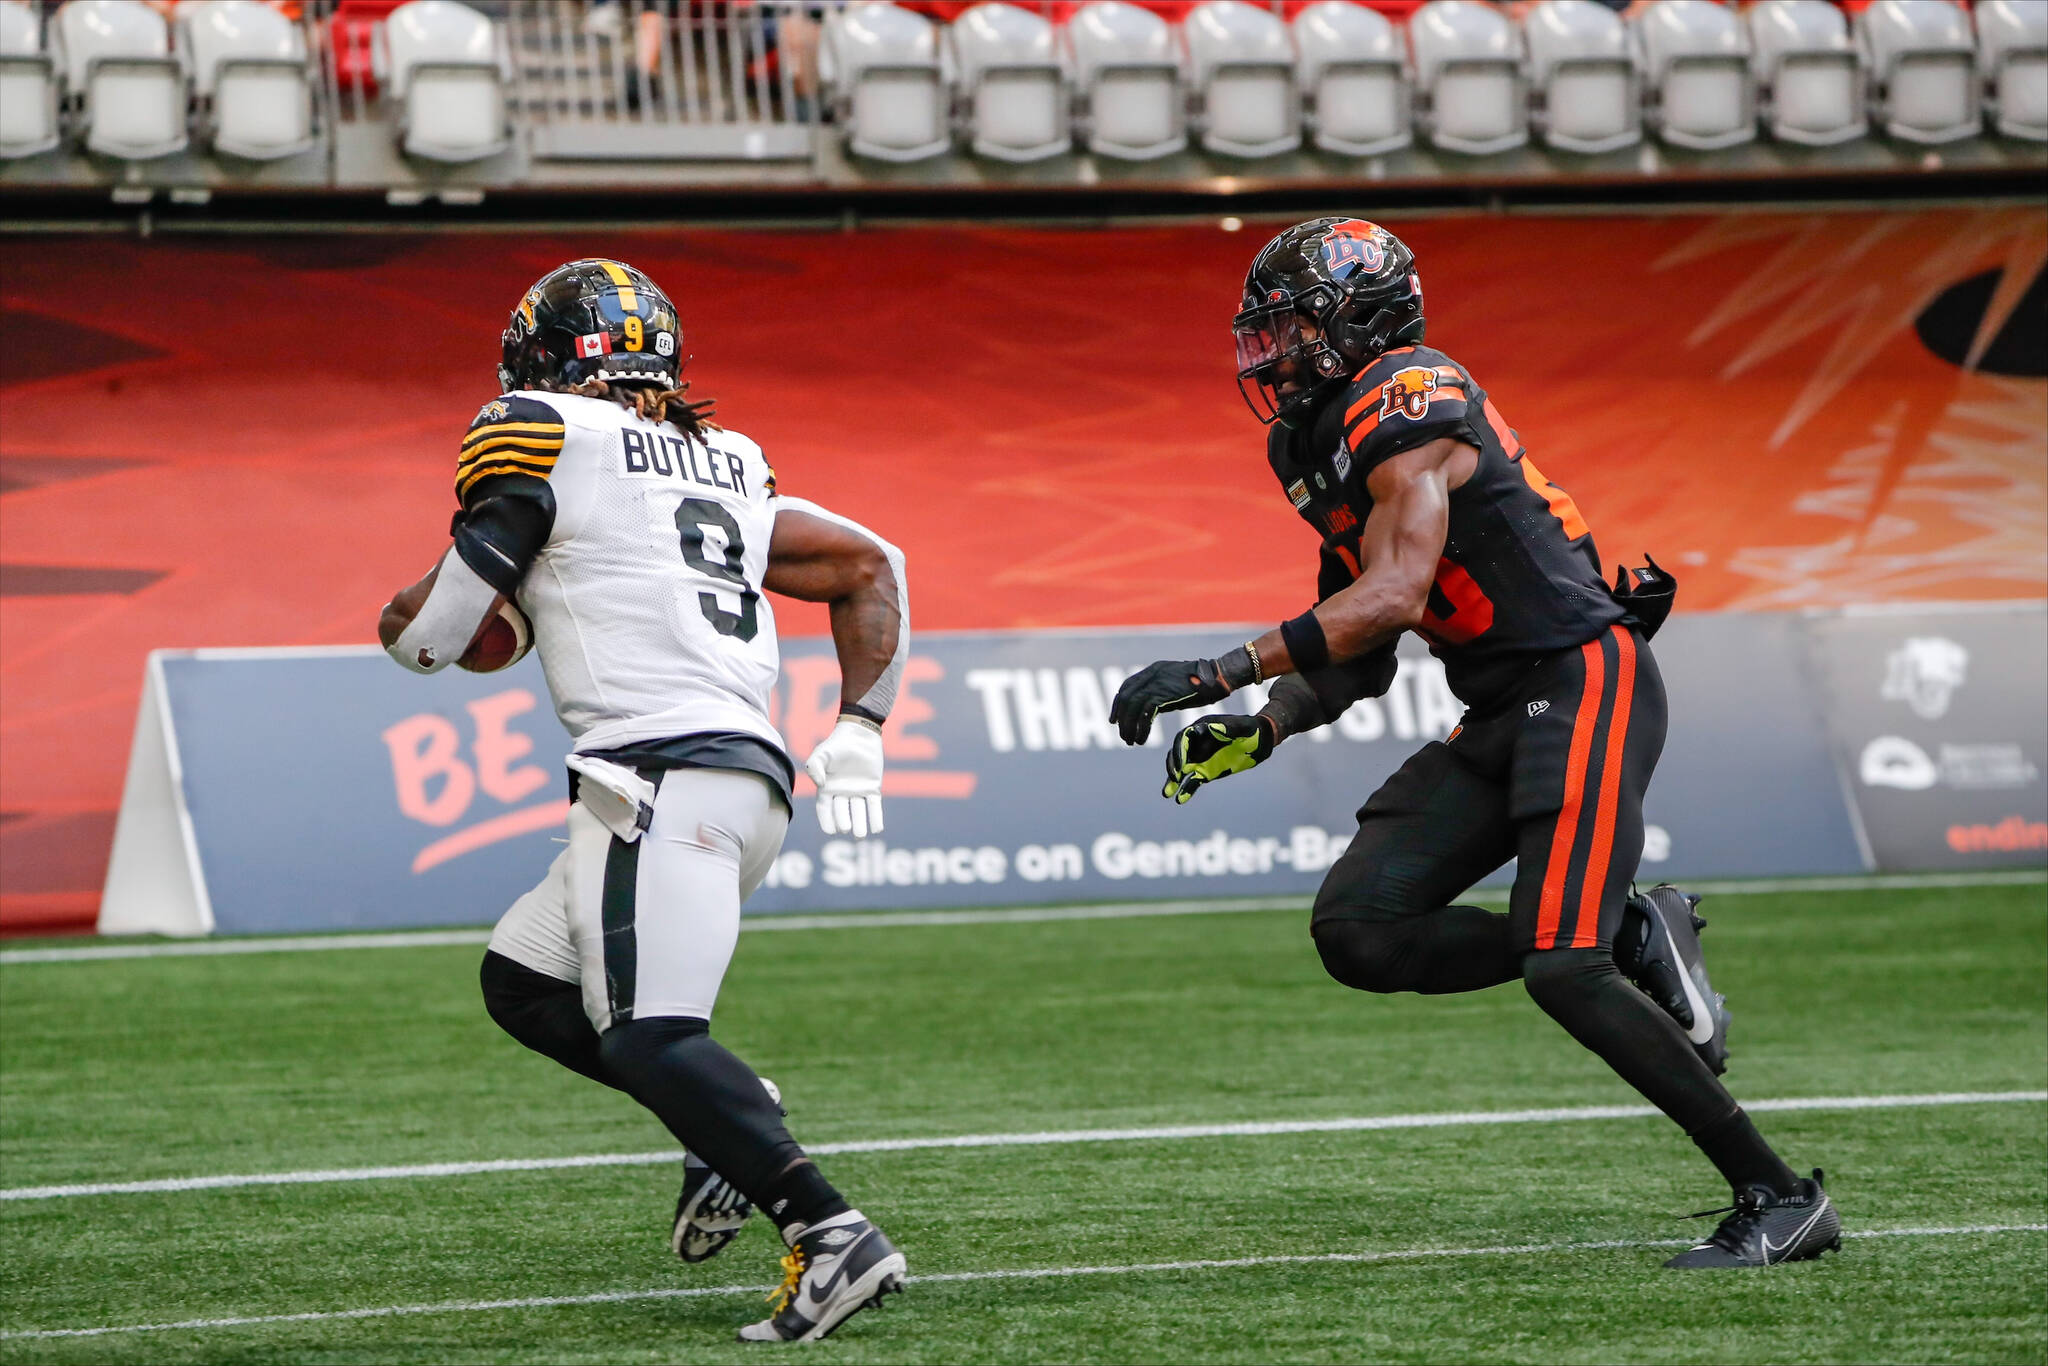 Former Lions James Butler scores one of his two touchdowns in helping the Hamilton Tiger-Cats beat the B.C. Lions 30-13 Aug. 26 at BC Place Stadium. Photo Steven Chang, B.C. Lions